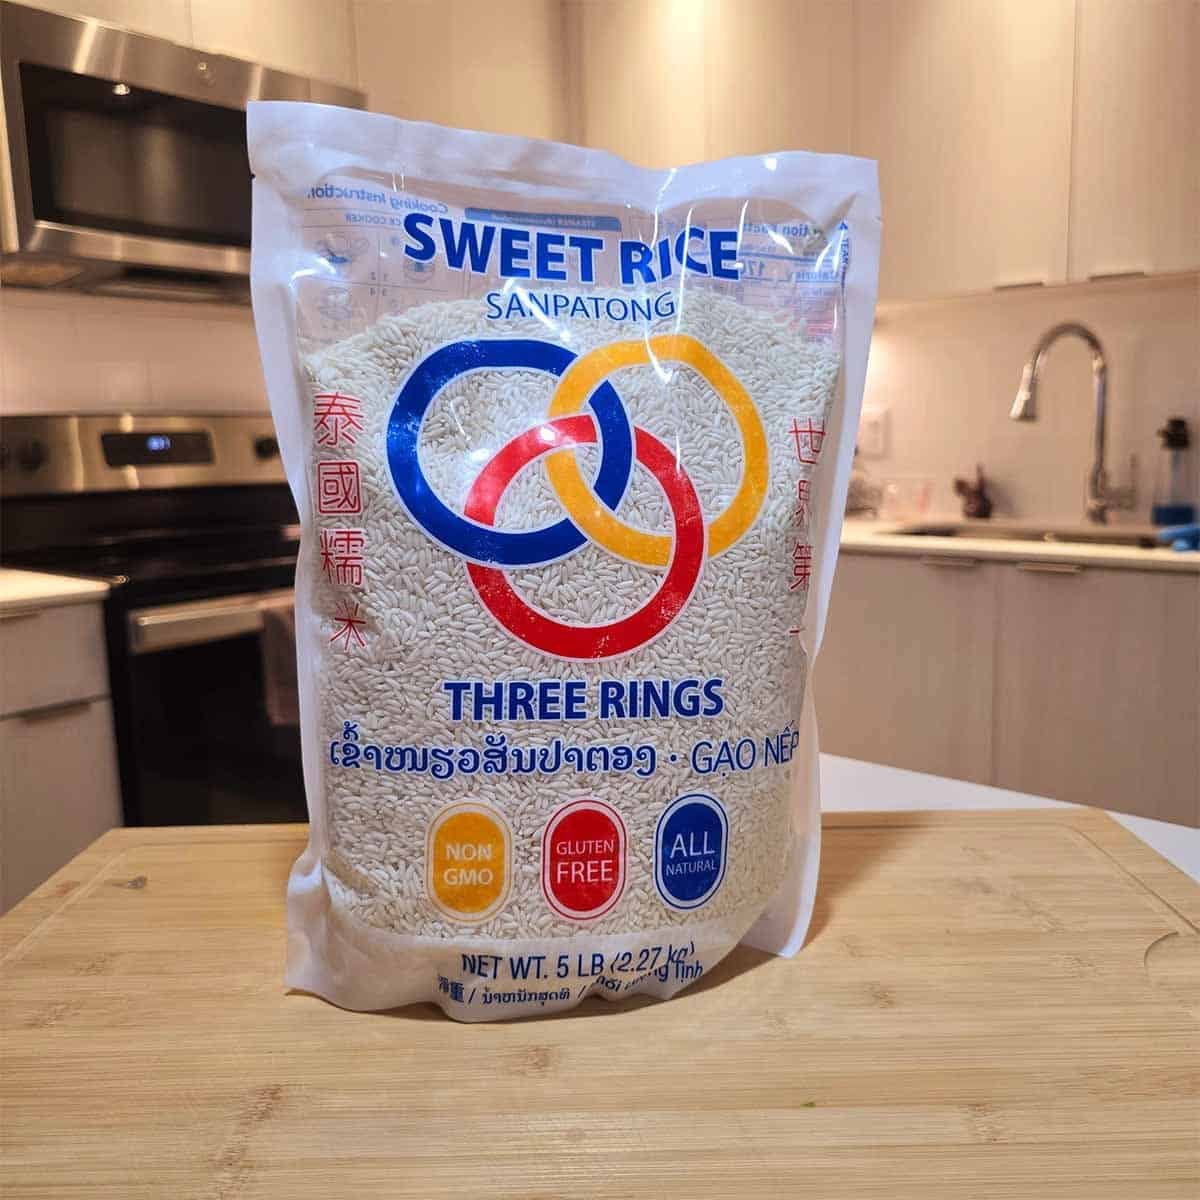 Bag of Three Rings Sweet Rice with distinctive blue, orange, and red rings on the packaging, labeled as glutinous rice, ideal for making sticky rice